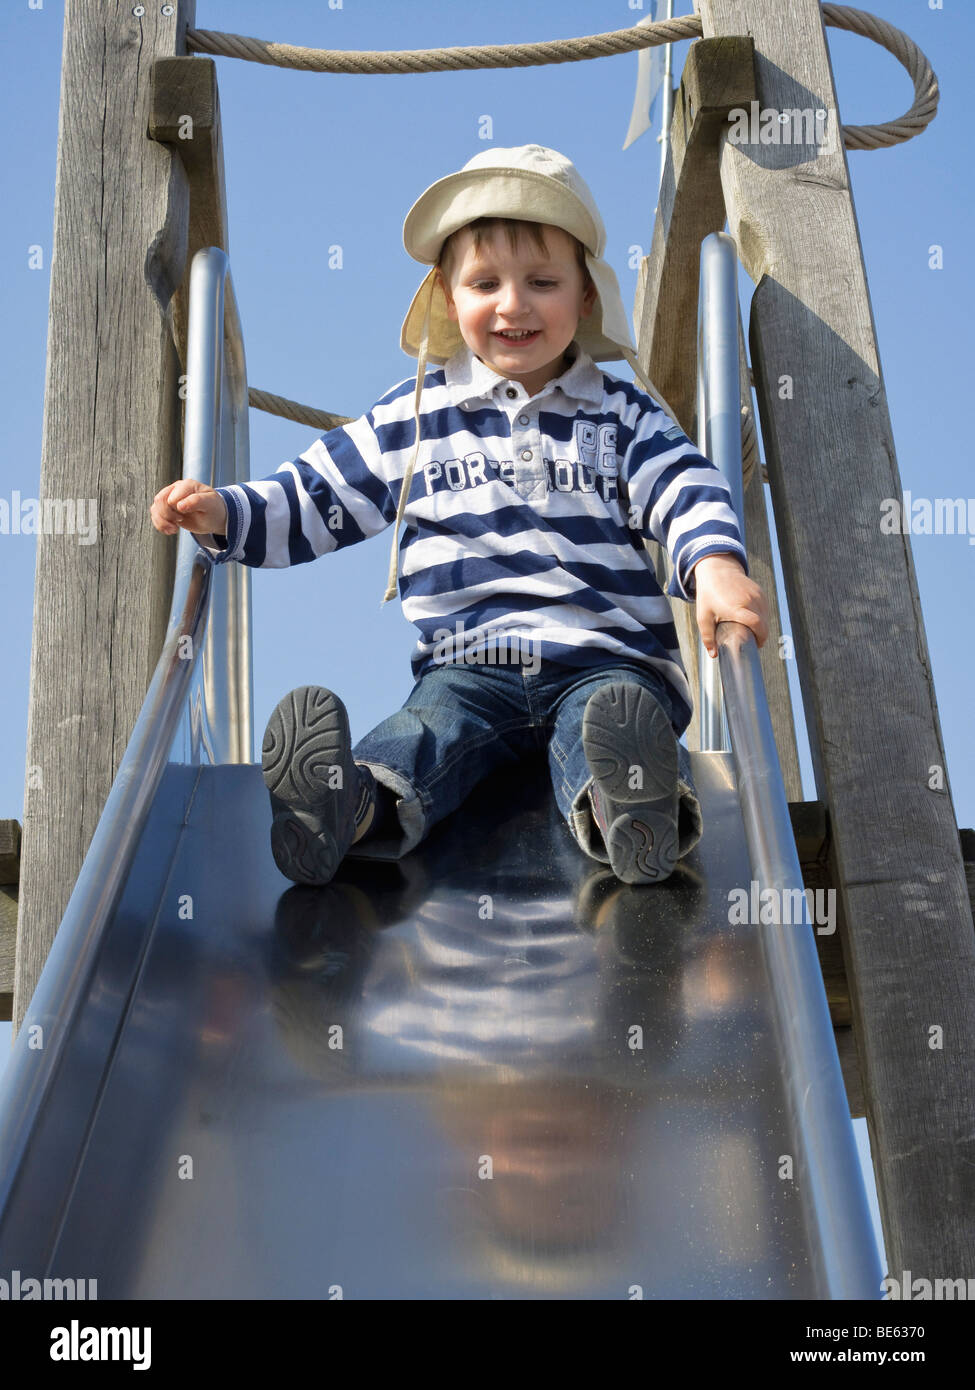 Young boy, 2 years old, sitting on a slide Stock Photo